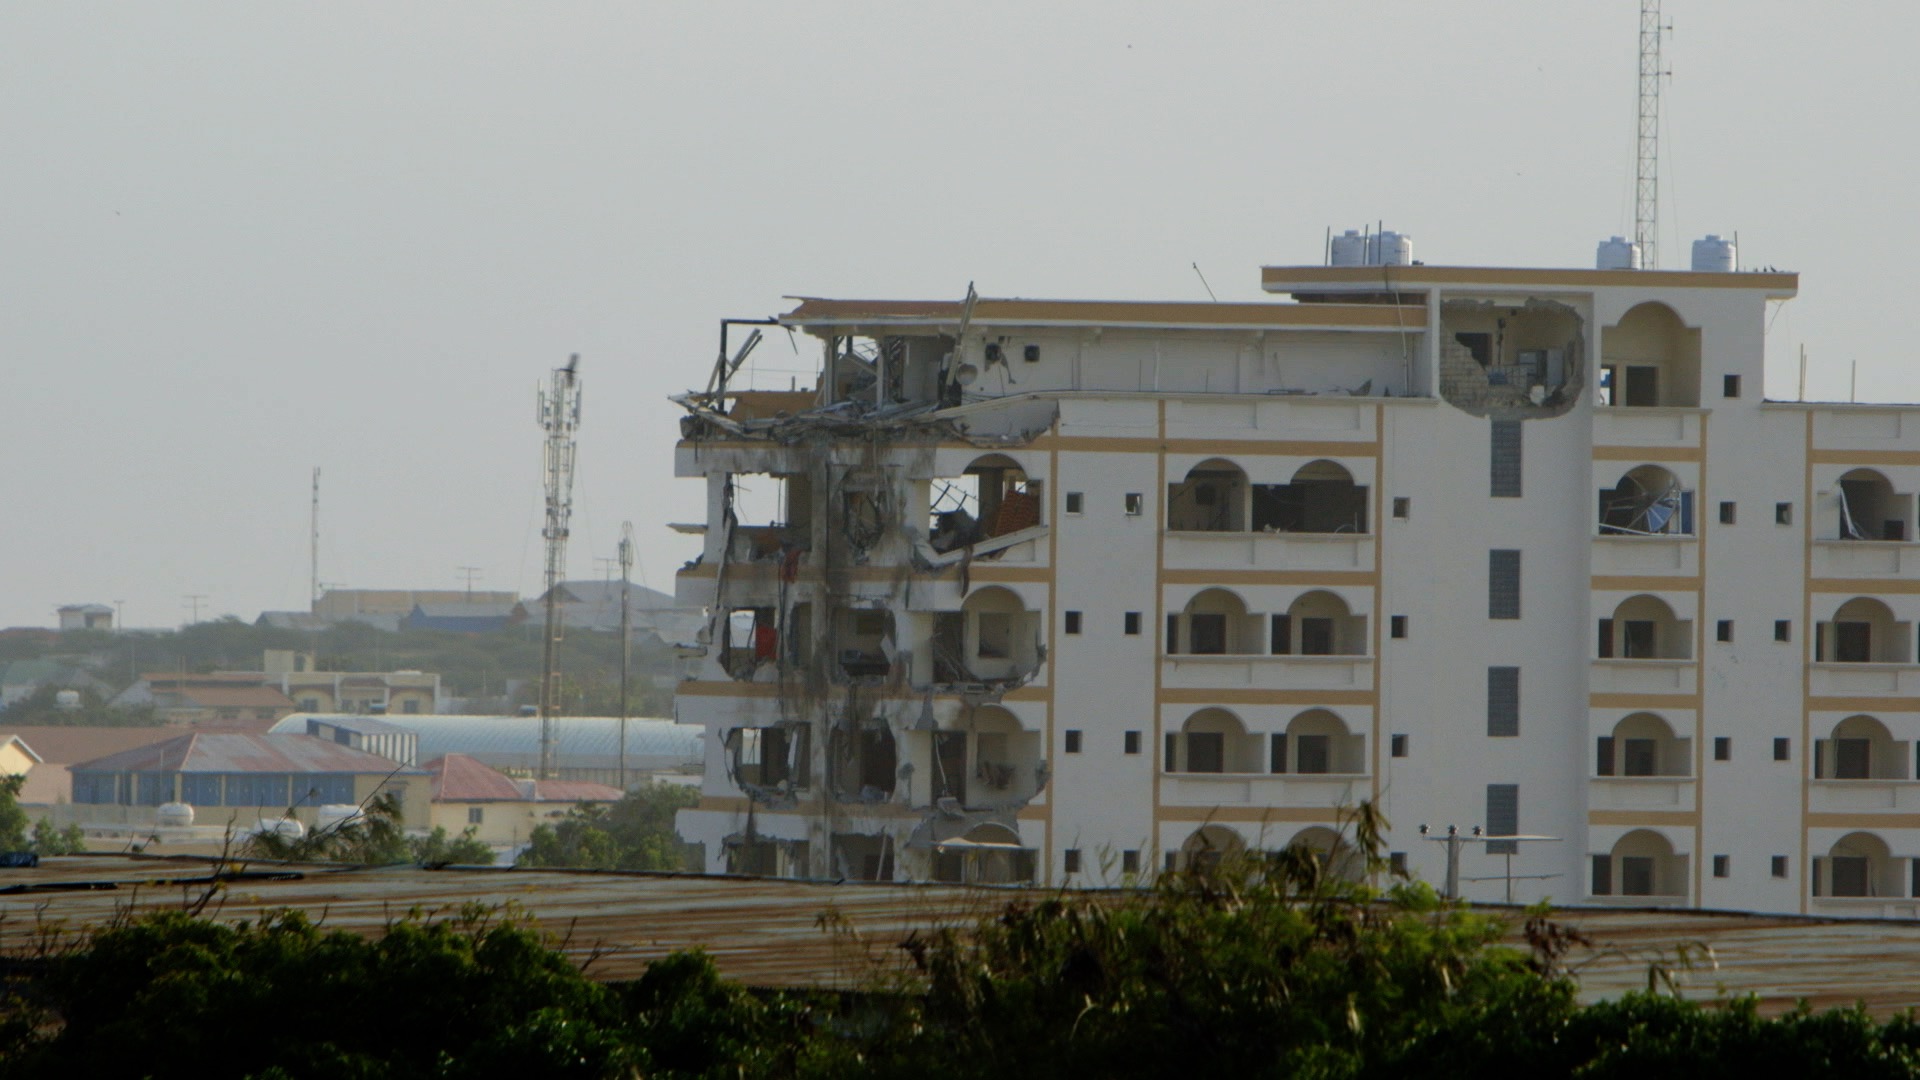 A suicide bombing attack in Mogadishu puts the crew on high alert.